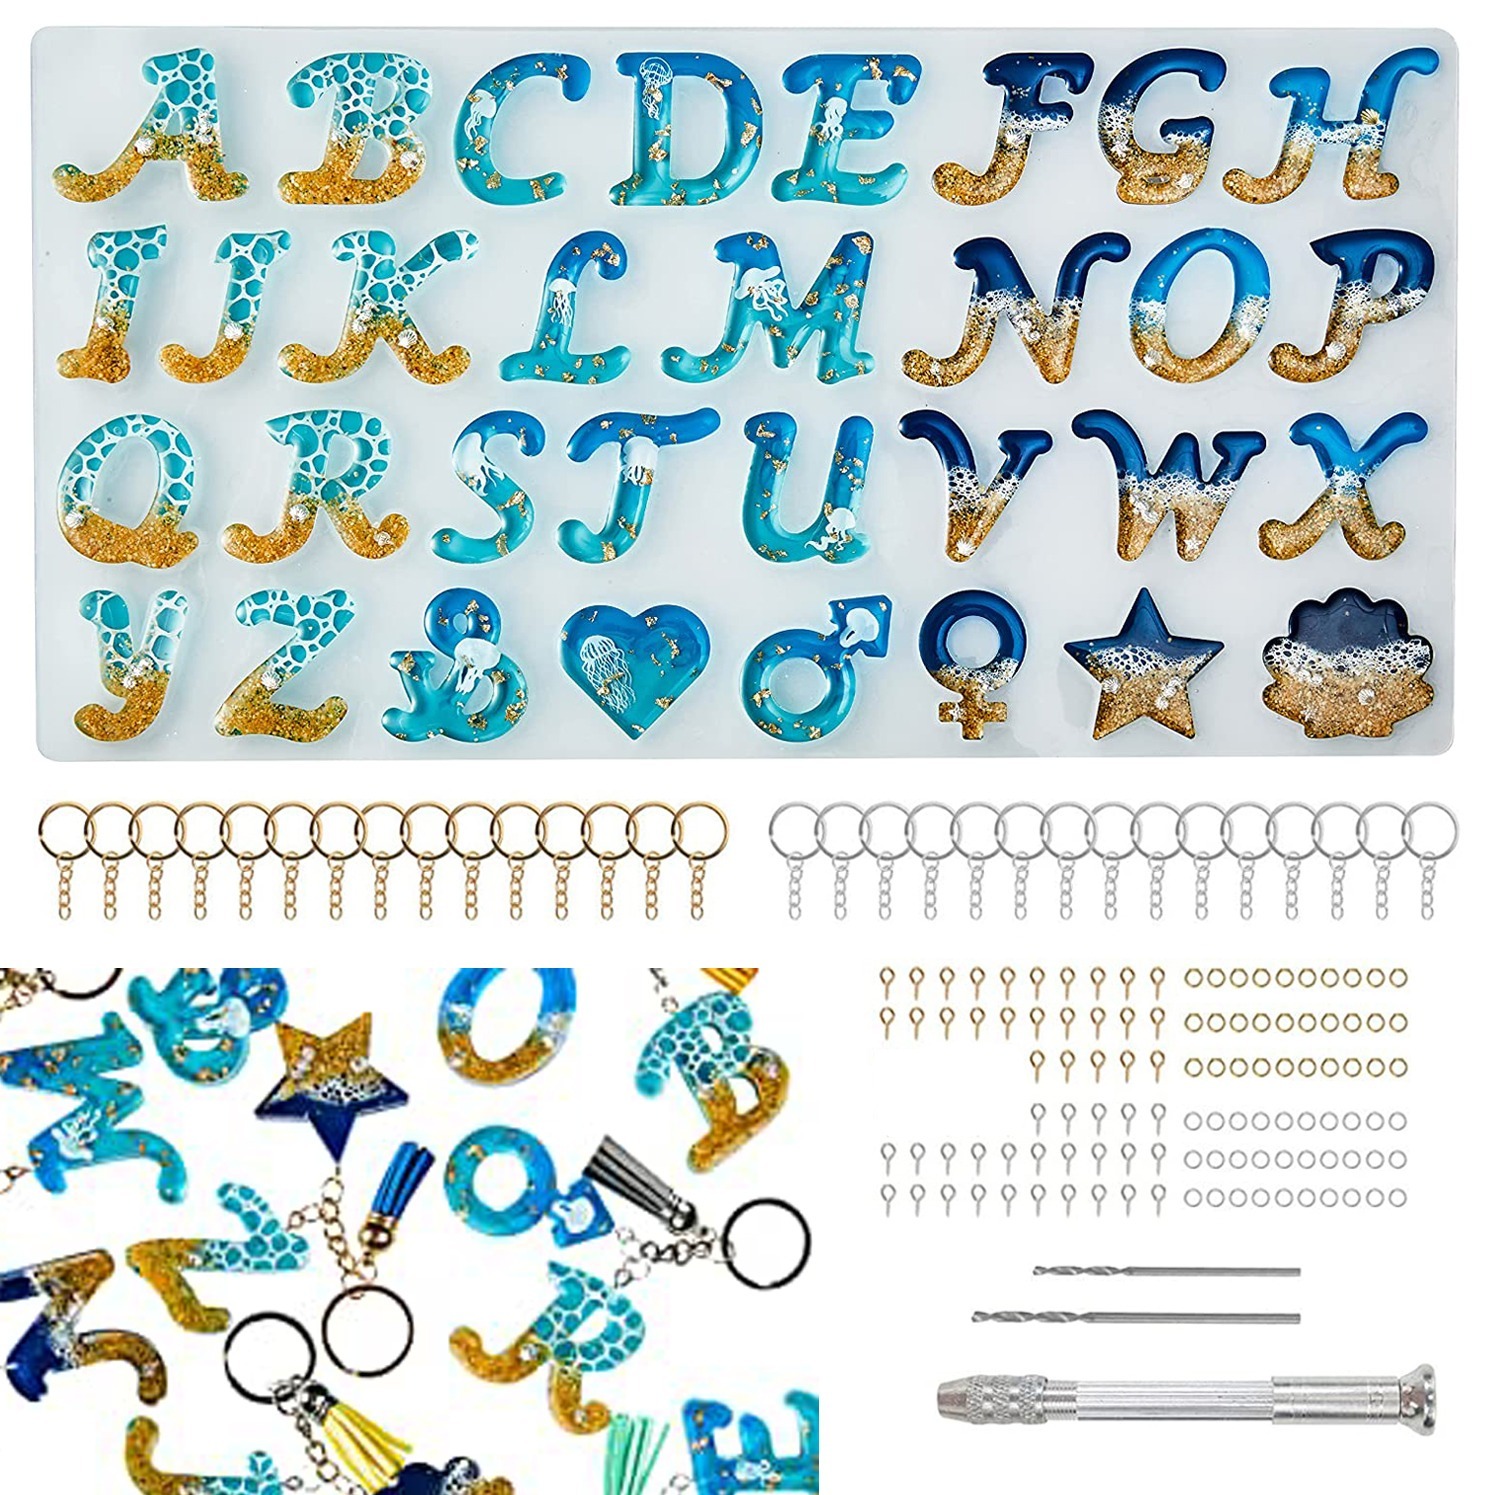 EVENS MORE DIY Resin Art Alphabet Keychain Mould Kit with 200 gm Resin,  Tassels Pigment Dry Flower - Price History